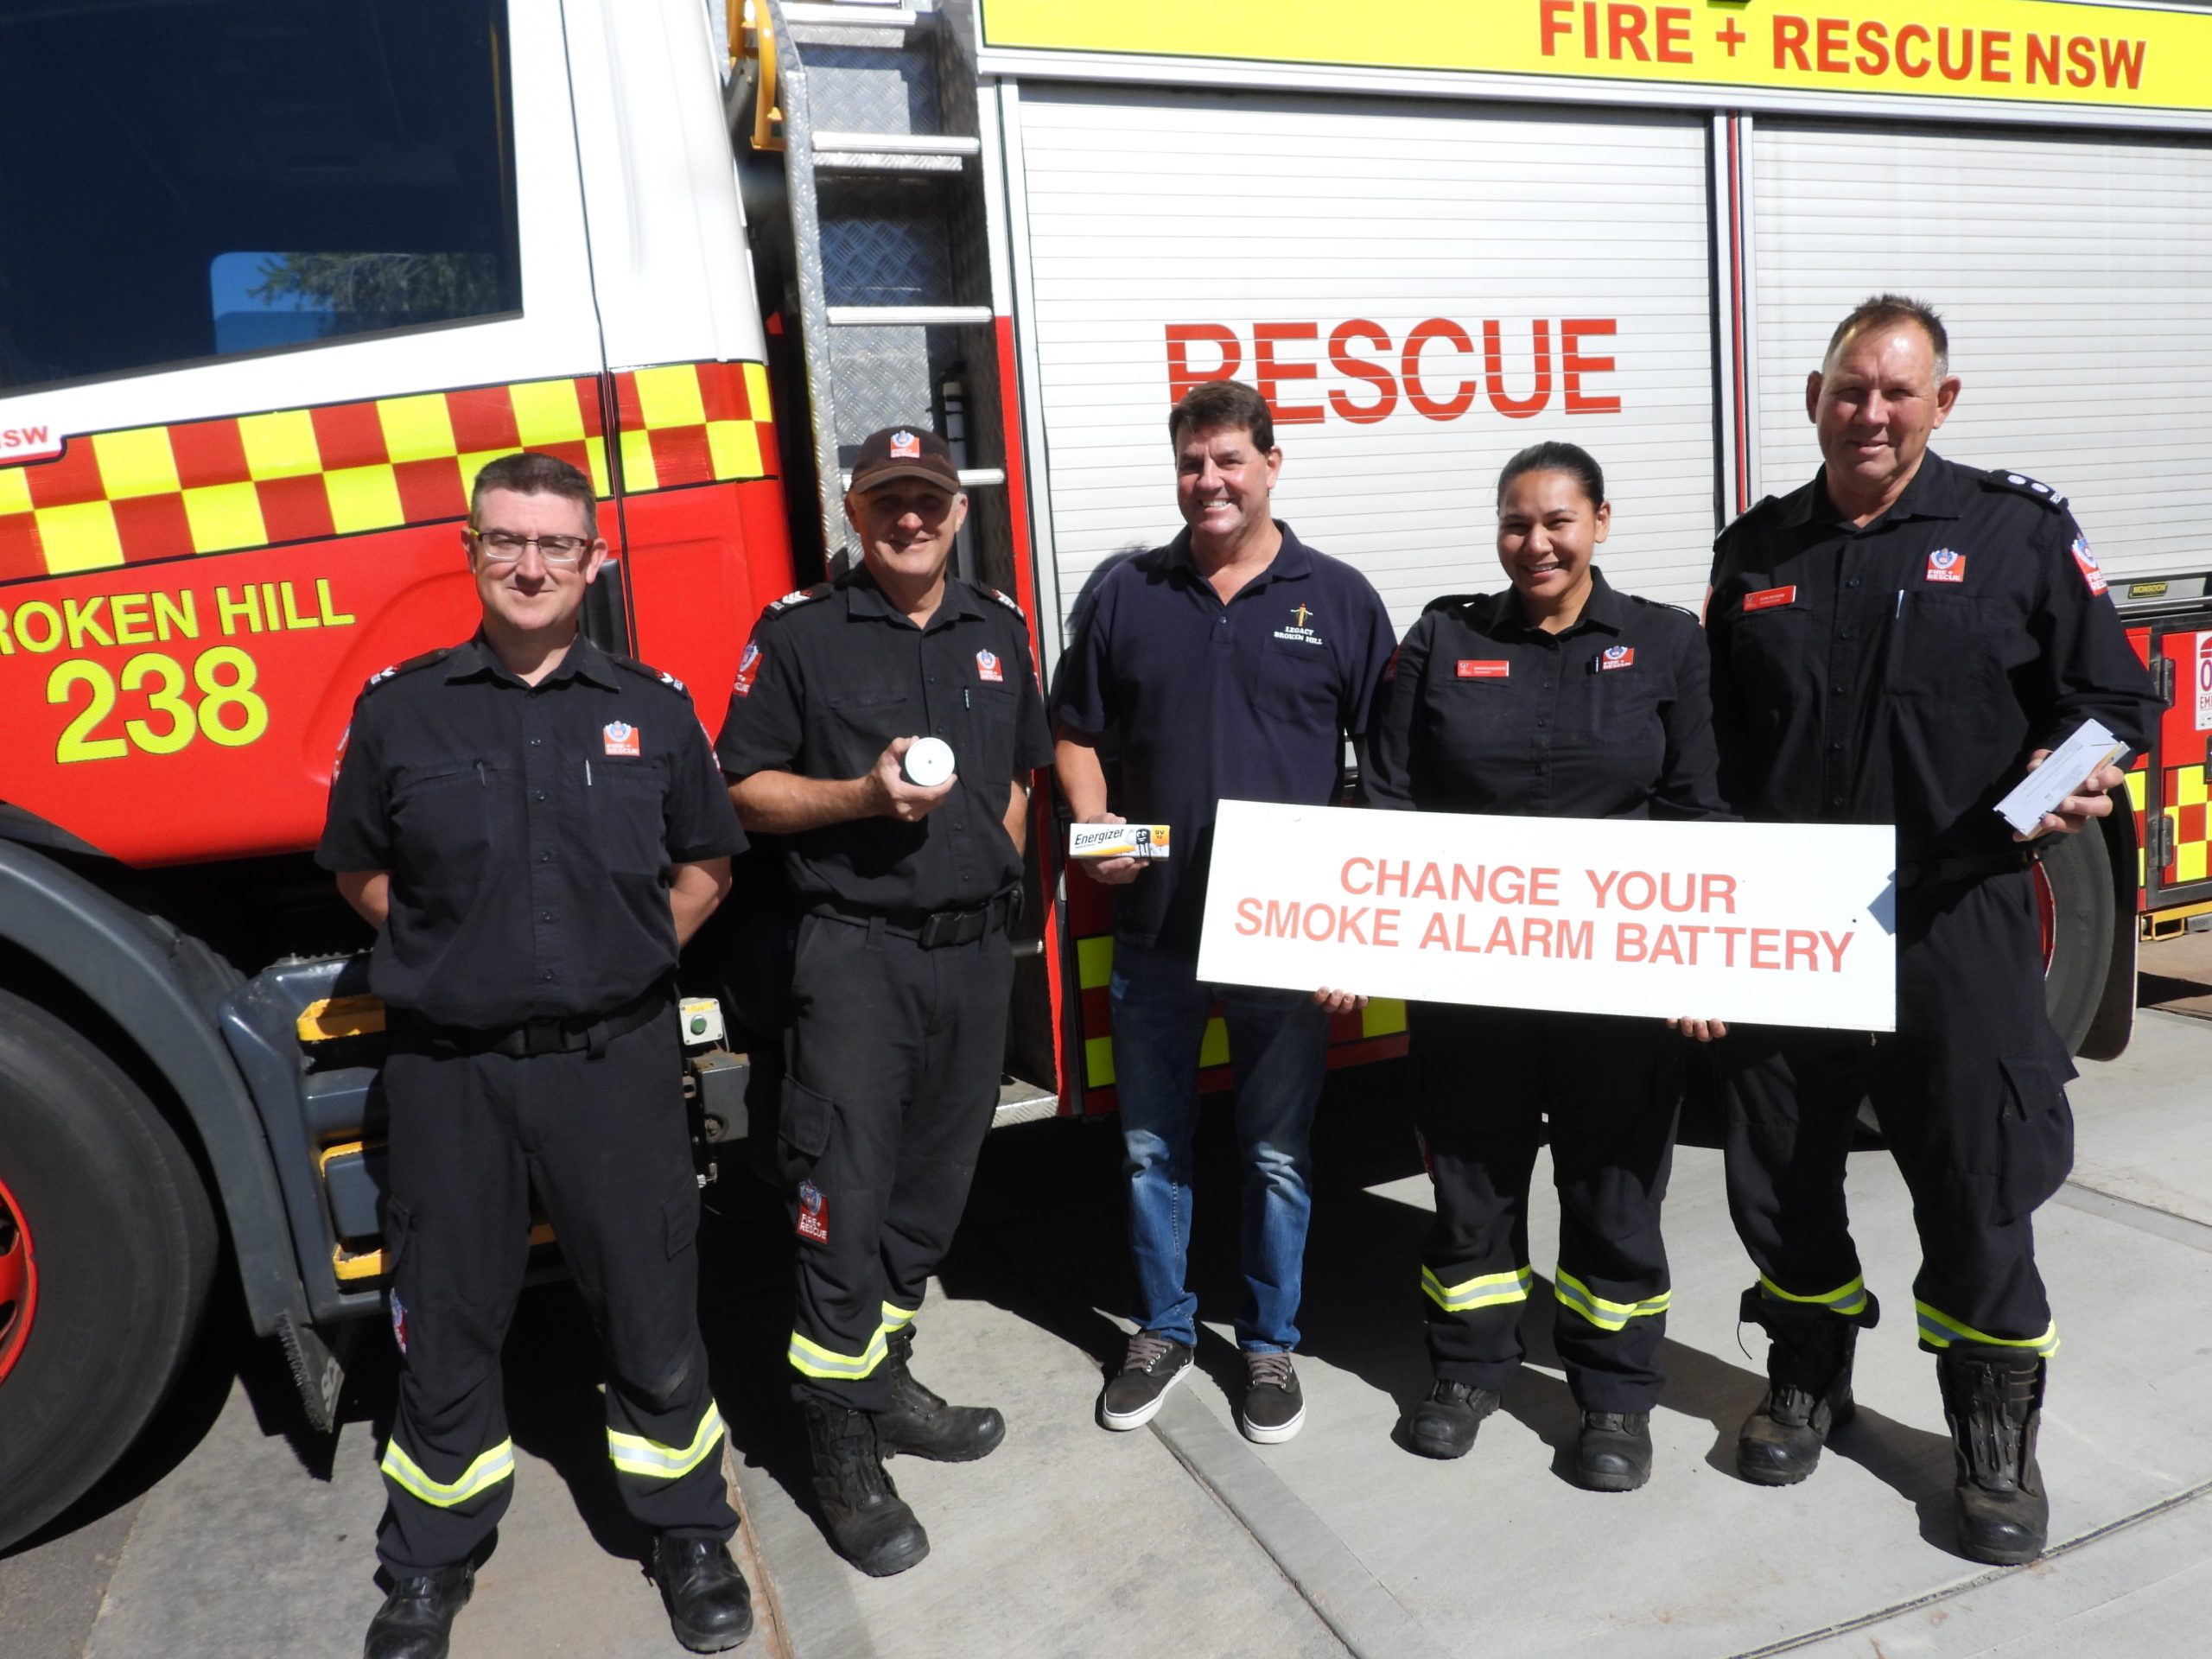 Broken Hill Legacy Club’s Mark Winen (centre) with Fire and Rescue NSW crew Joel Bartley (left), Geoff Lehman, Saraiha Rakete and Don Peters. PICTURE: ANDREW LODIONG